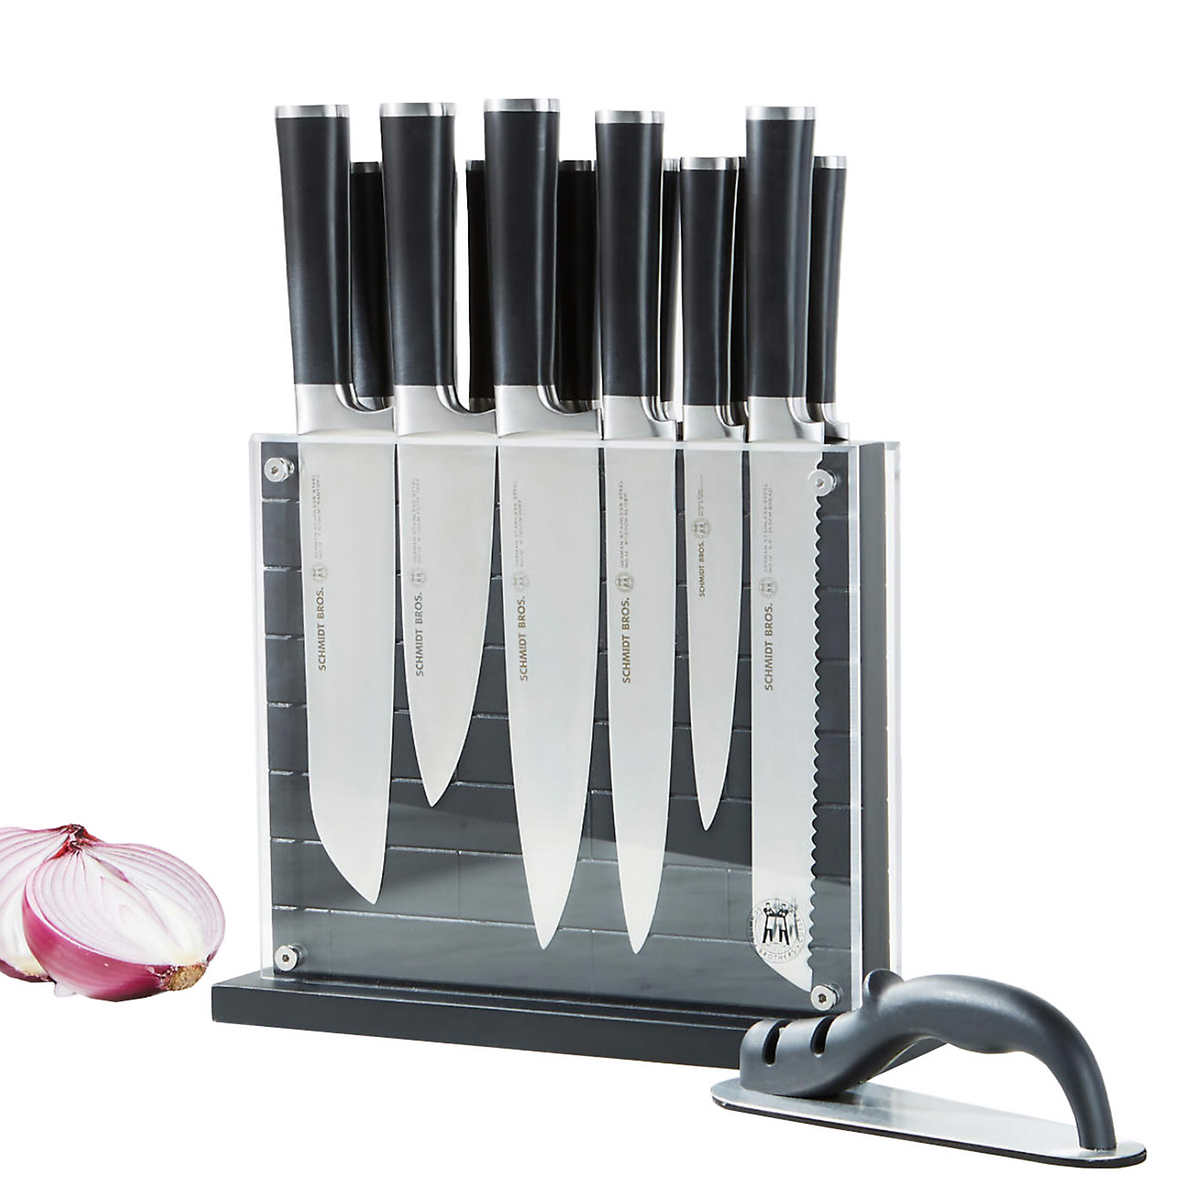 11 Piece Color Coded Kitchen Knife Set-5 Knives with 5 Blade Guards, Knife  Sharp